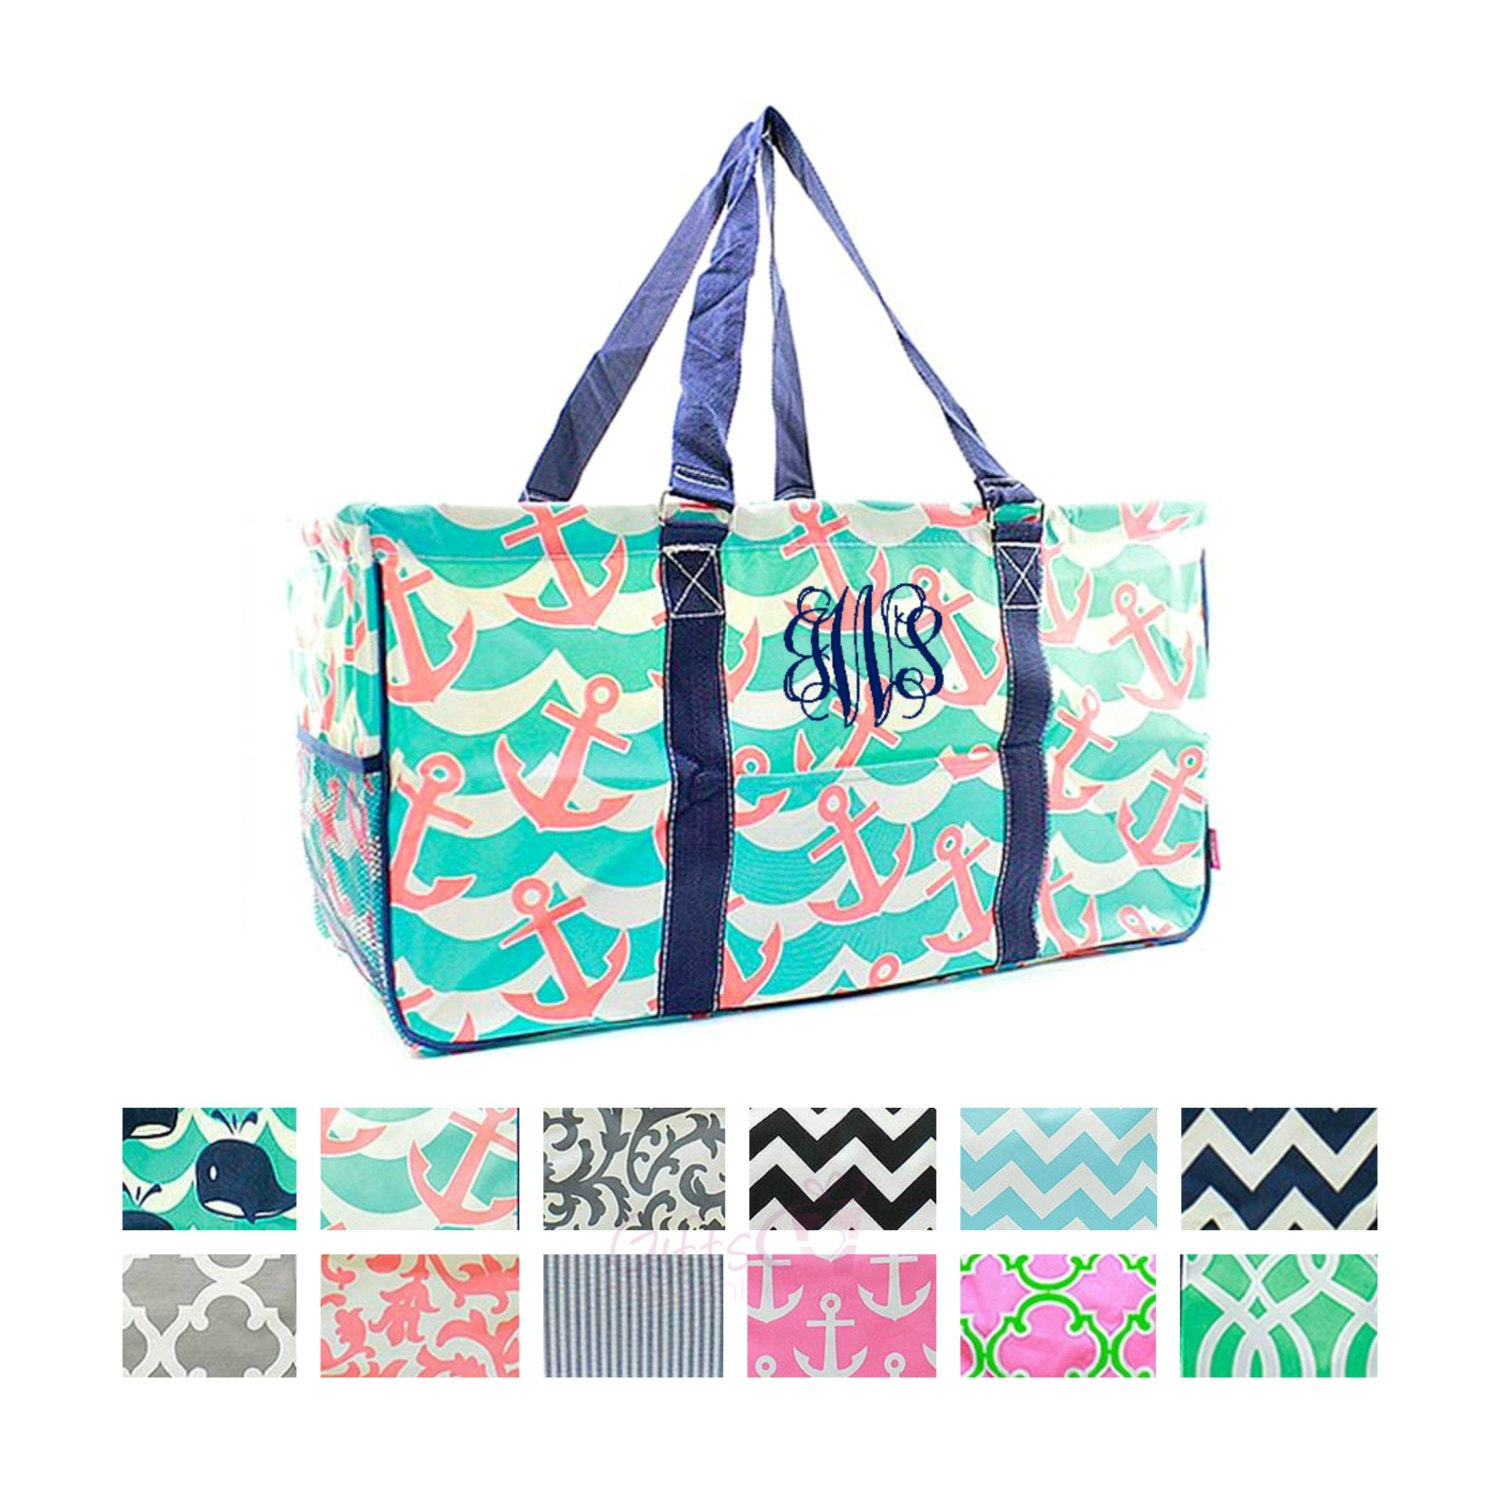 Monogrammed Large Utility Tote Bag Personalized by GiftsHappenHere